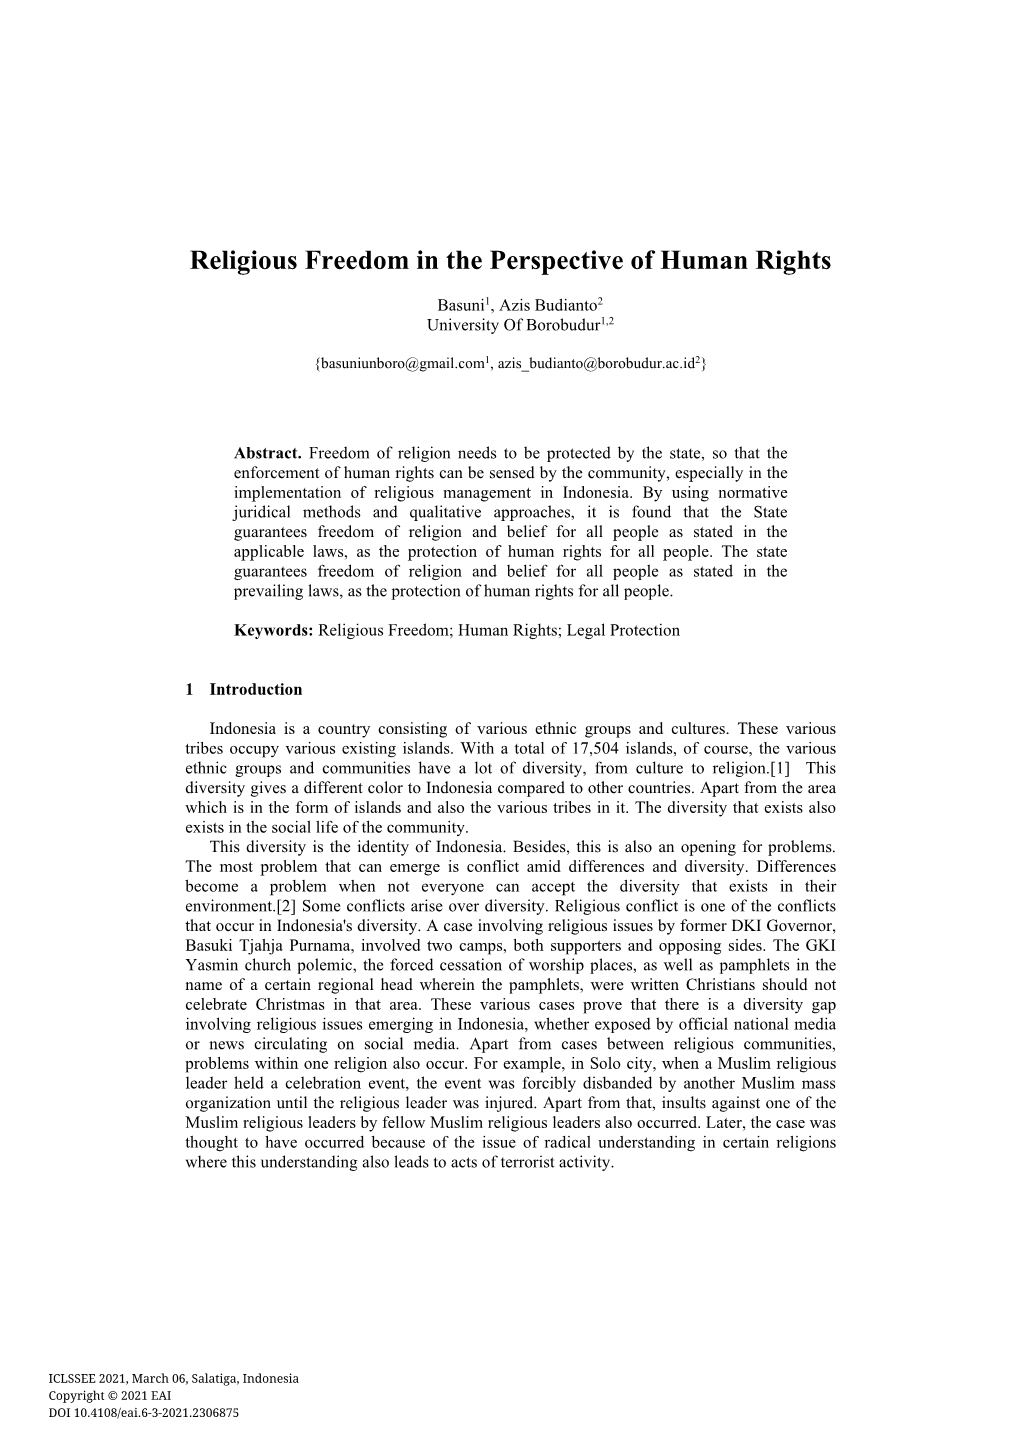 Religious Freedom in the Perspective of Human Rights